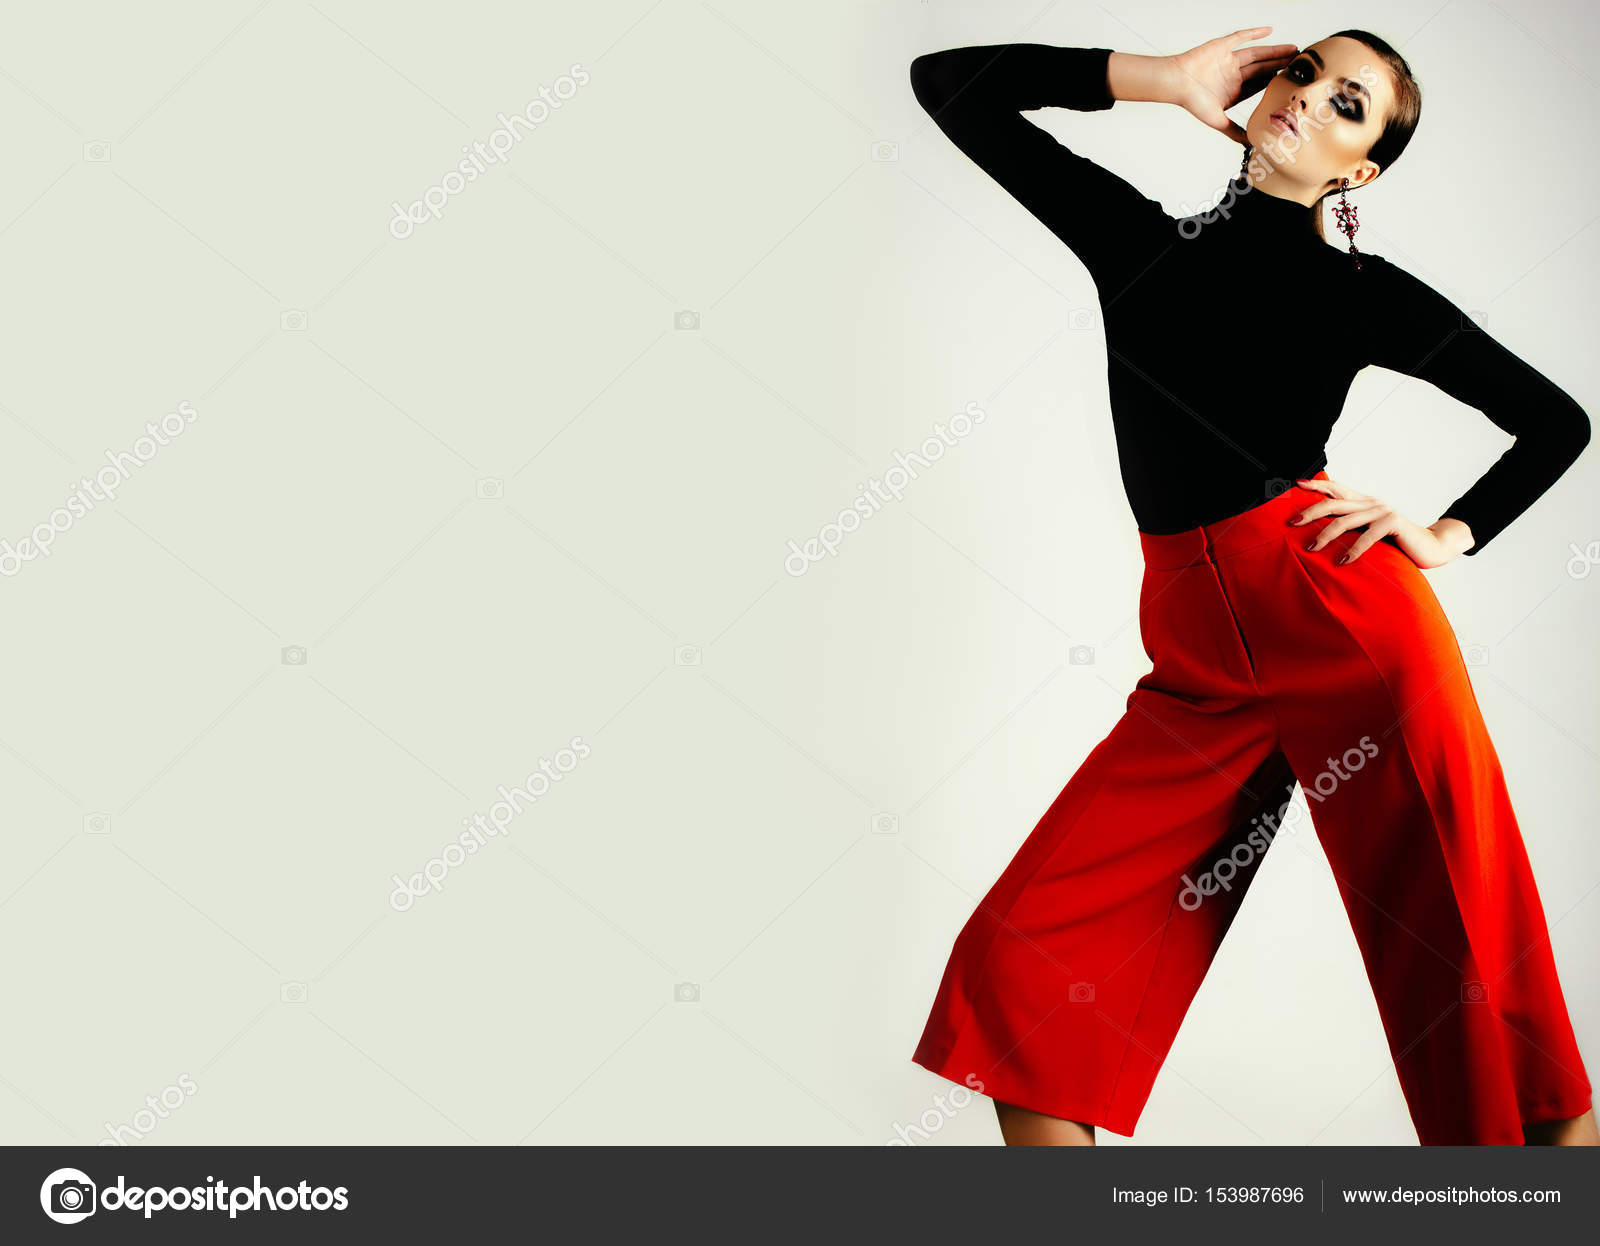 Young Trendy Man Leather Jacket Red Stock Photo 598240598 | Shutterstock